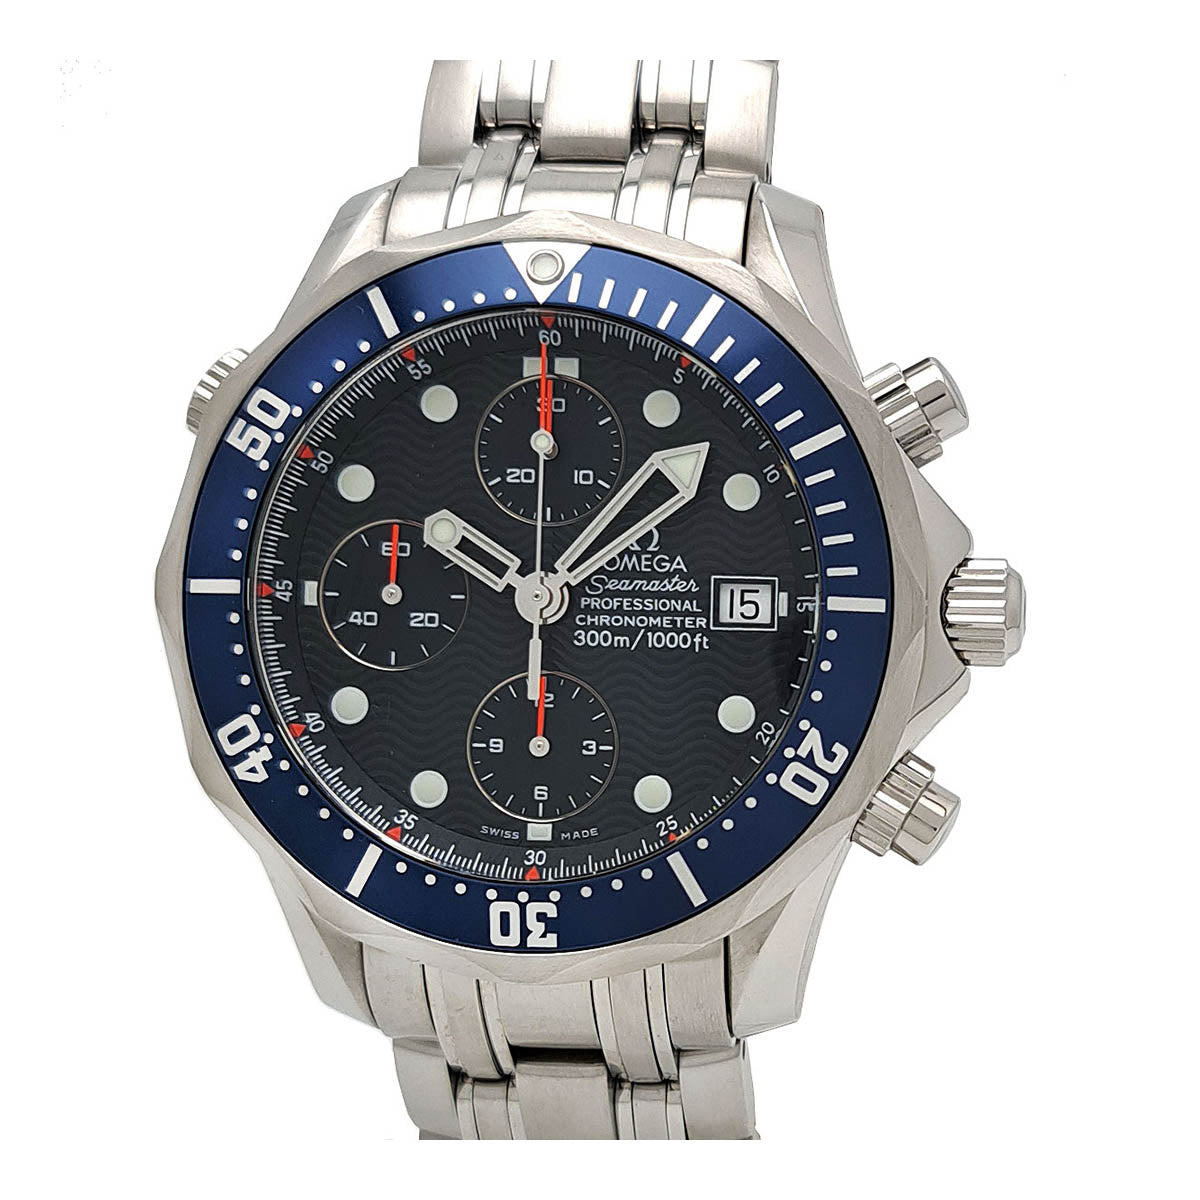 OMEGA Seamaster 300M Diver Chronograph 2599.80 Automatic Stainless Steel Men’s Pre-owned Watch 2599.8